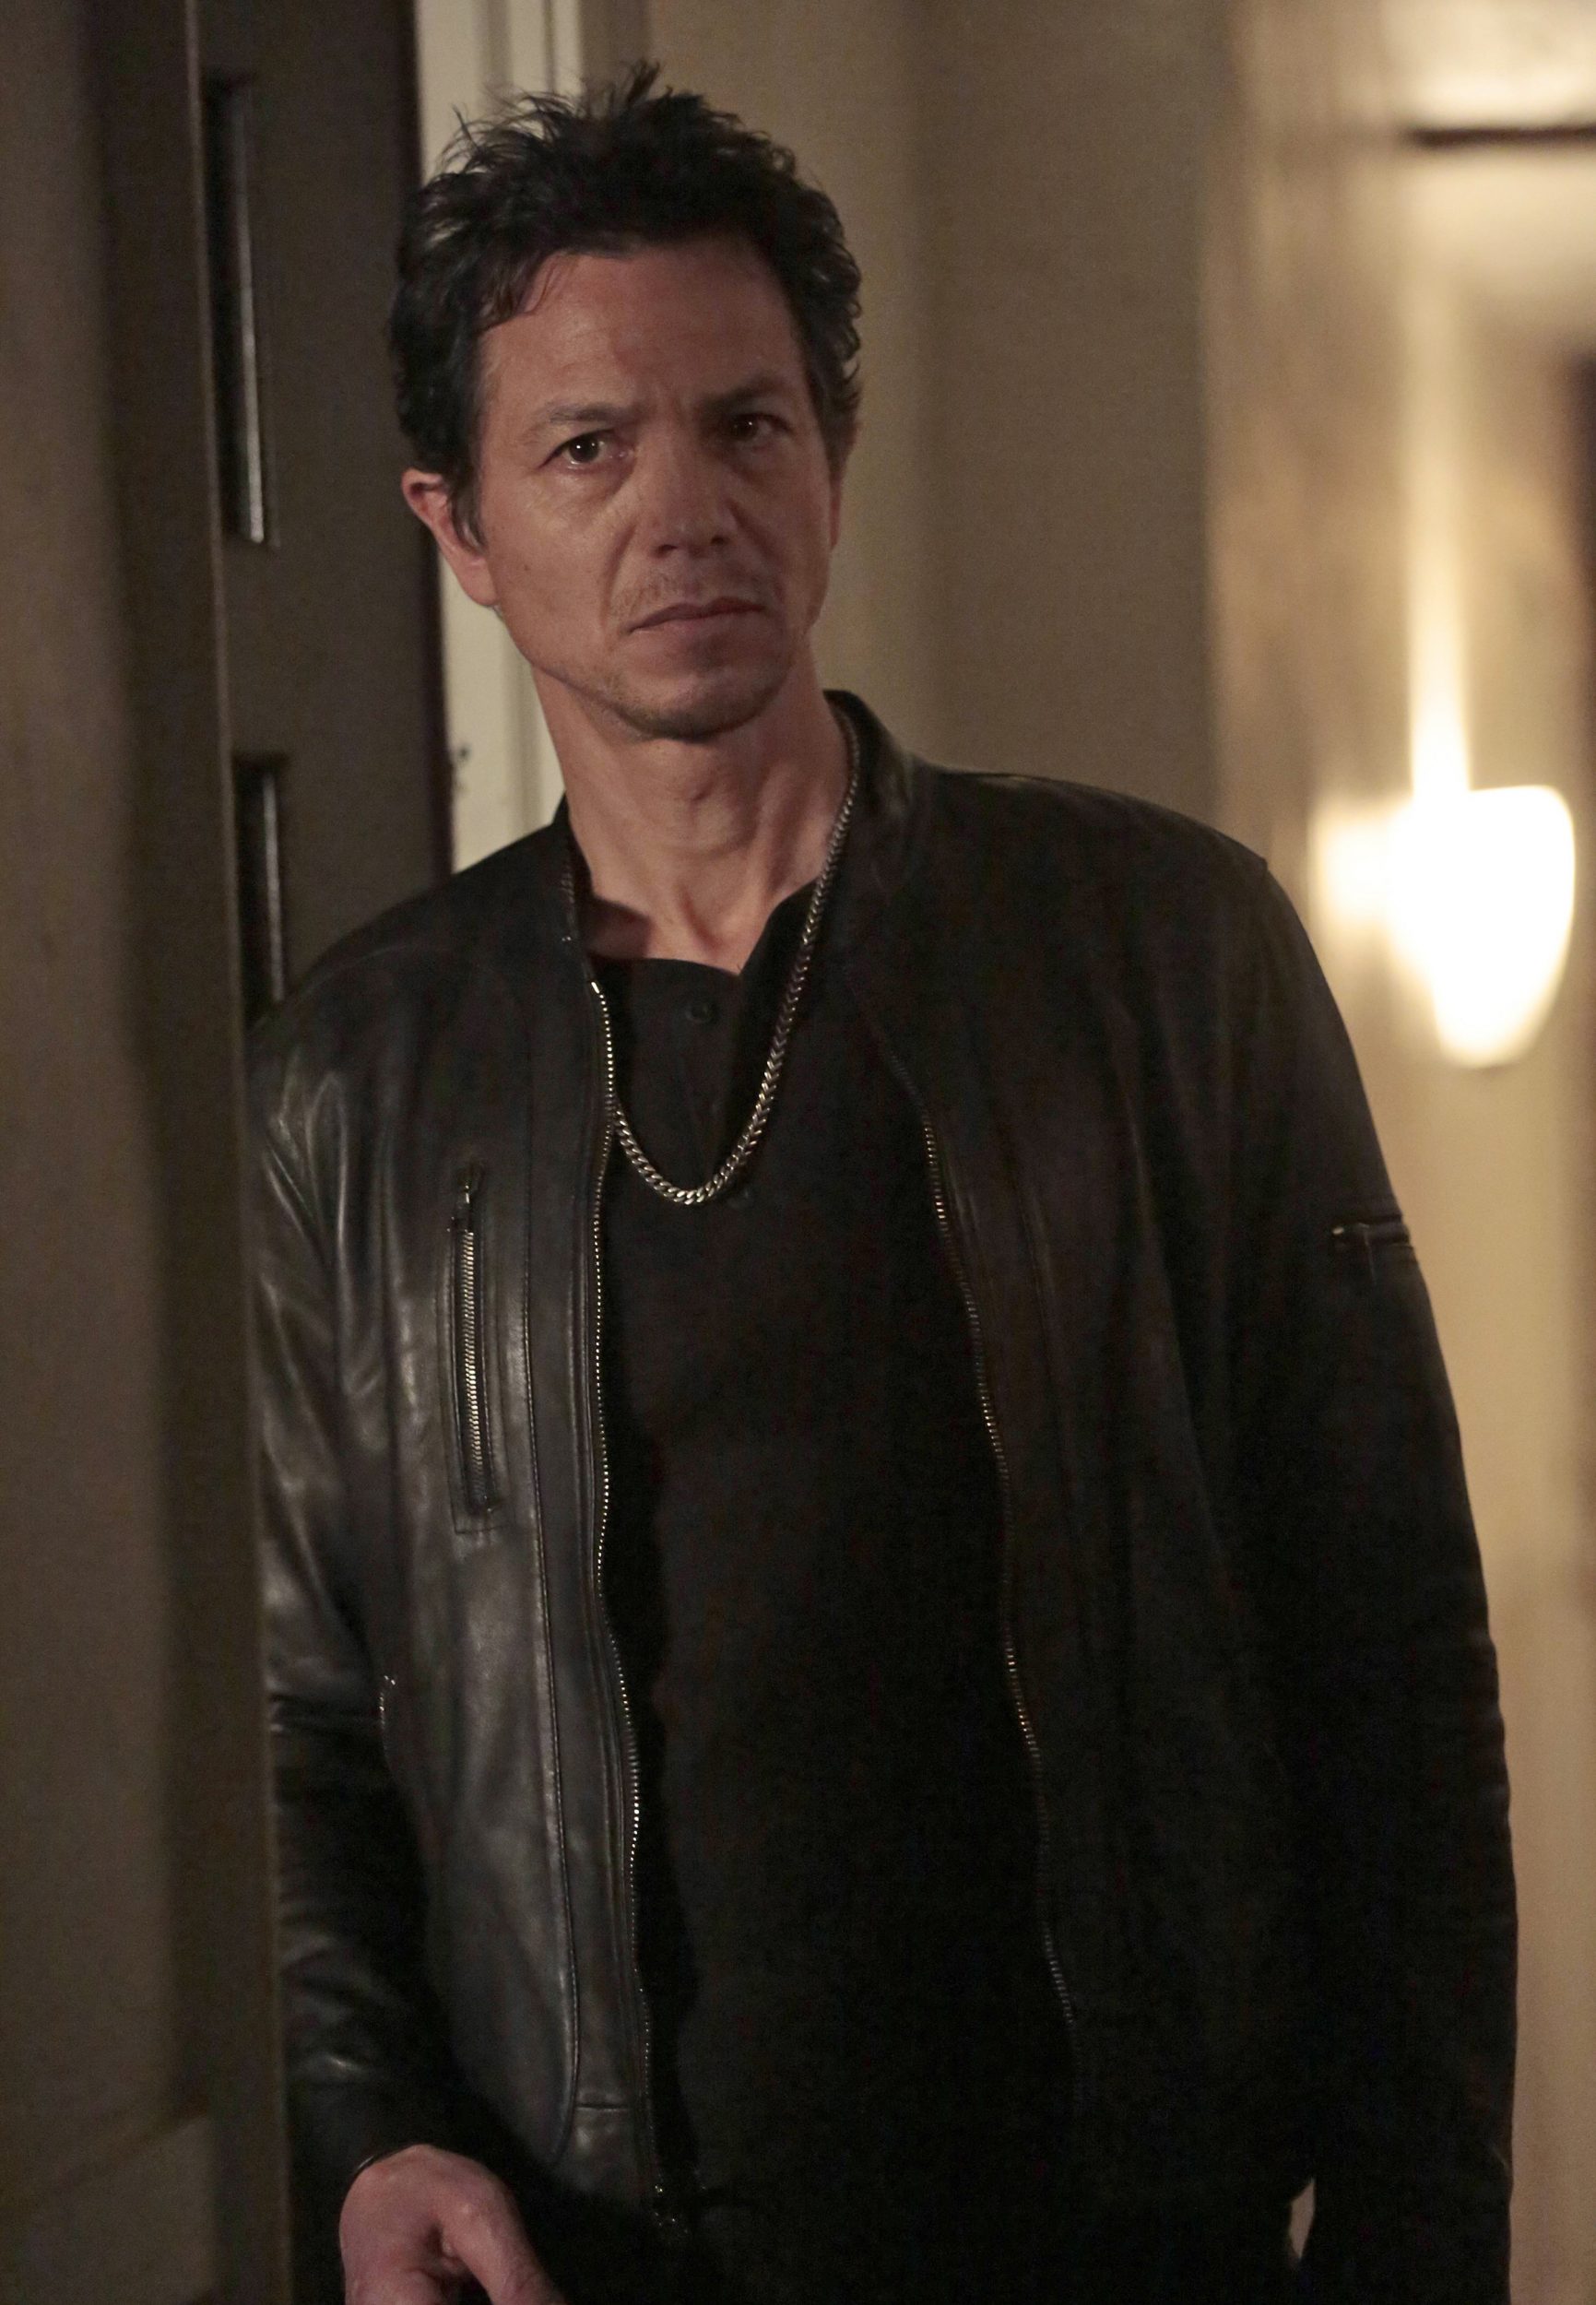 STAR: Benjamin Bratt in the "Showtime" season finale episode of STAR airing Wednesday, March 15 (9:01 PM - 10:00 PM ET/PT) on FOX. ©2017 Fox Broadcasting Co. CR: Carin Baer/FOX